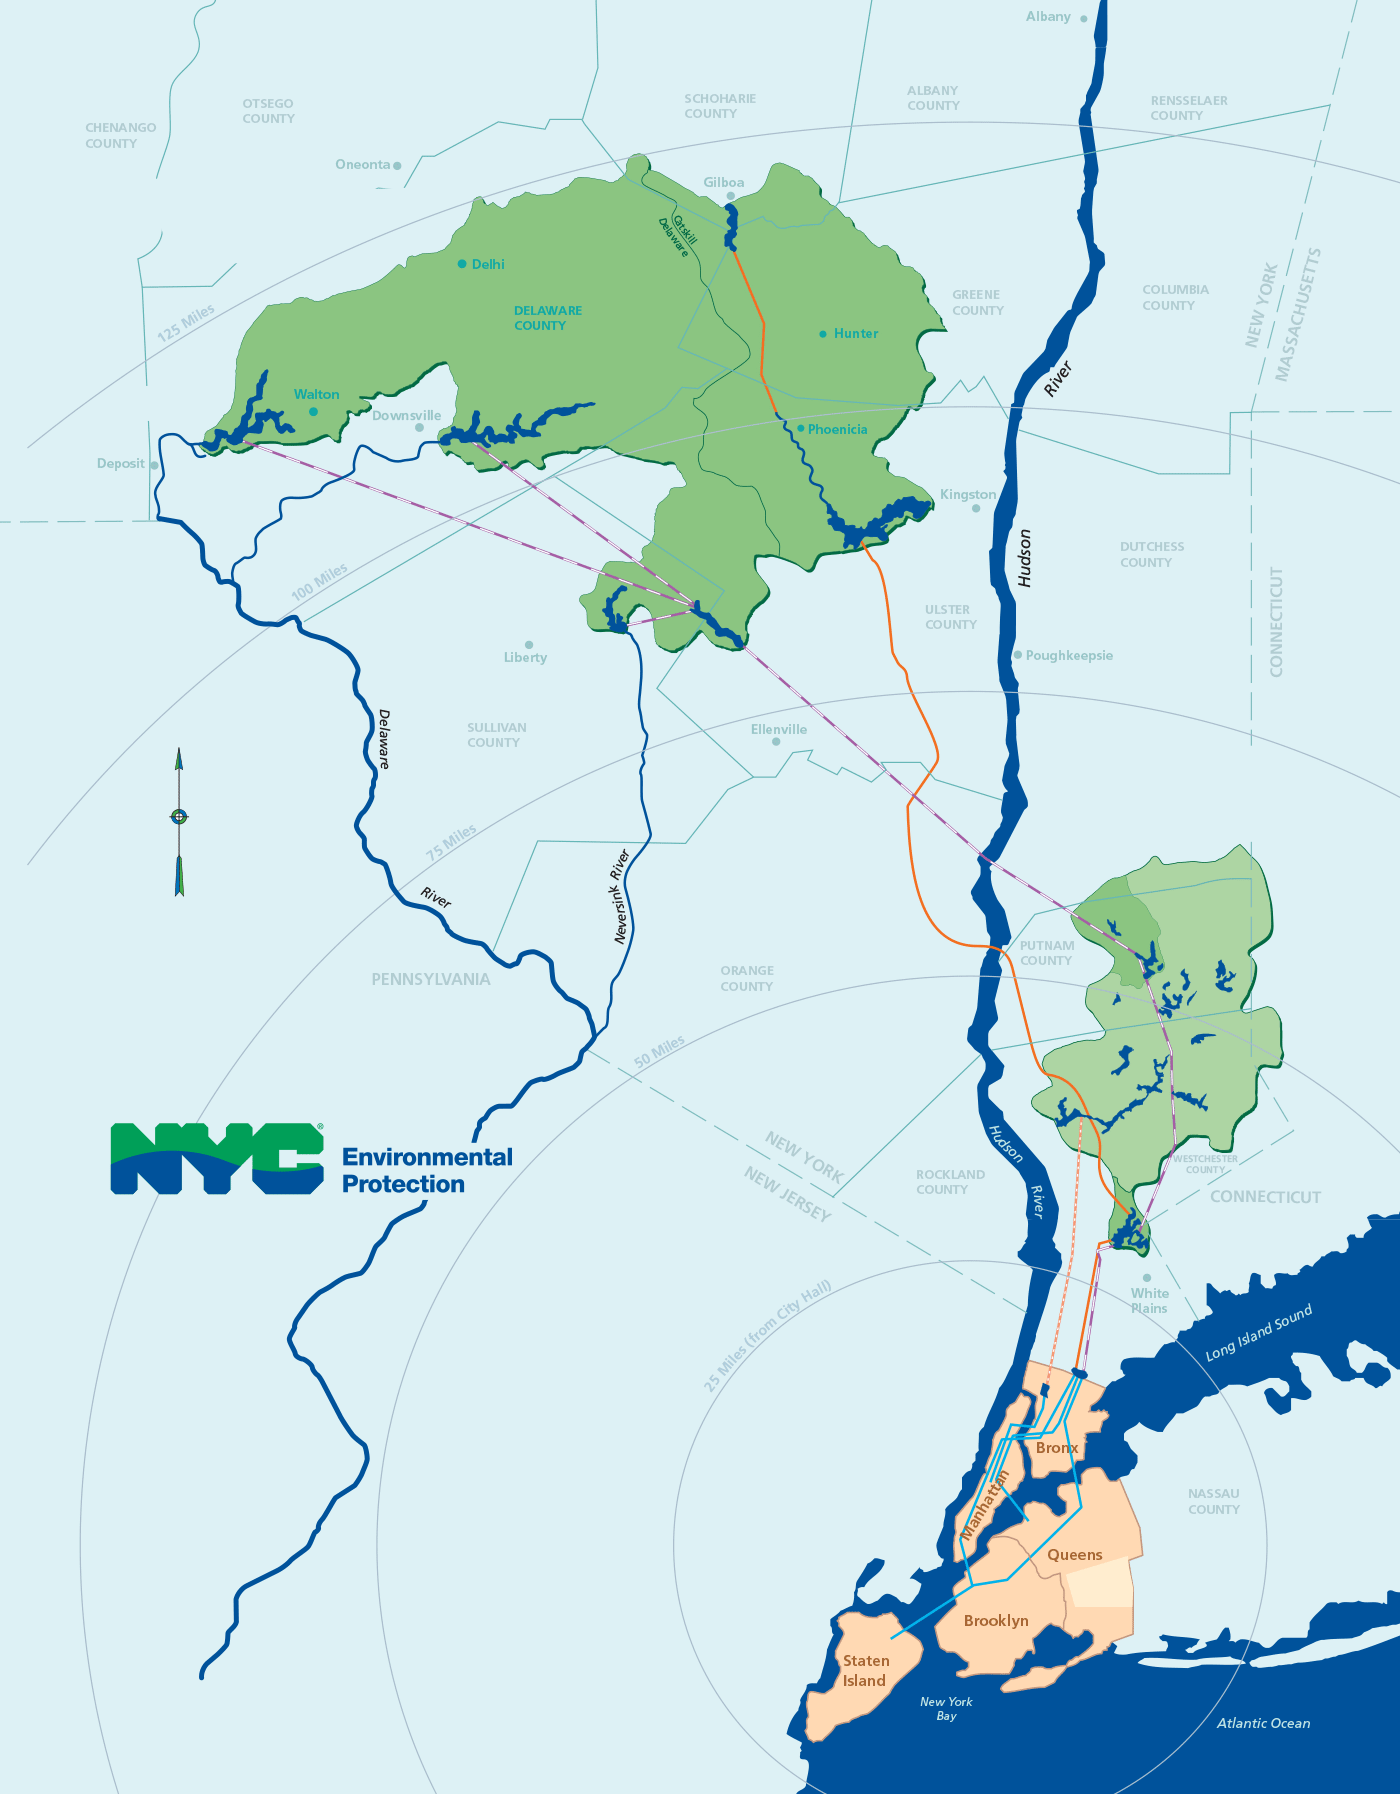 New York City’s Water Supply System